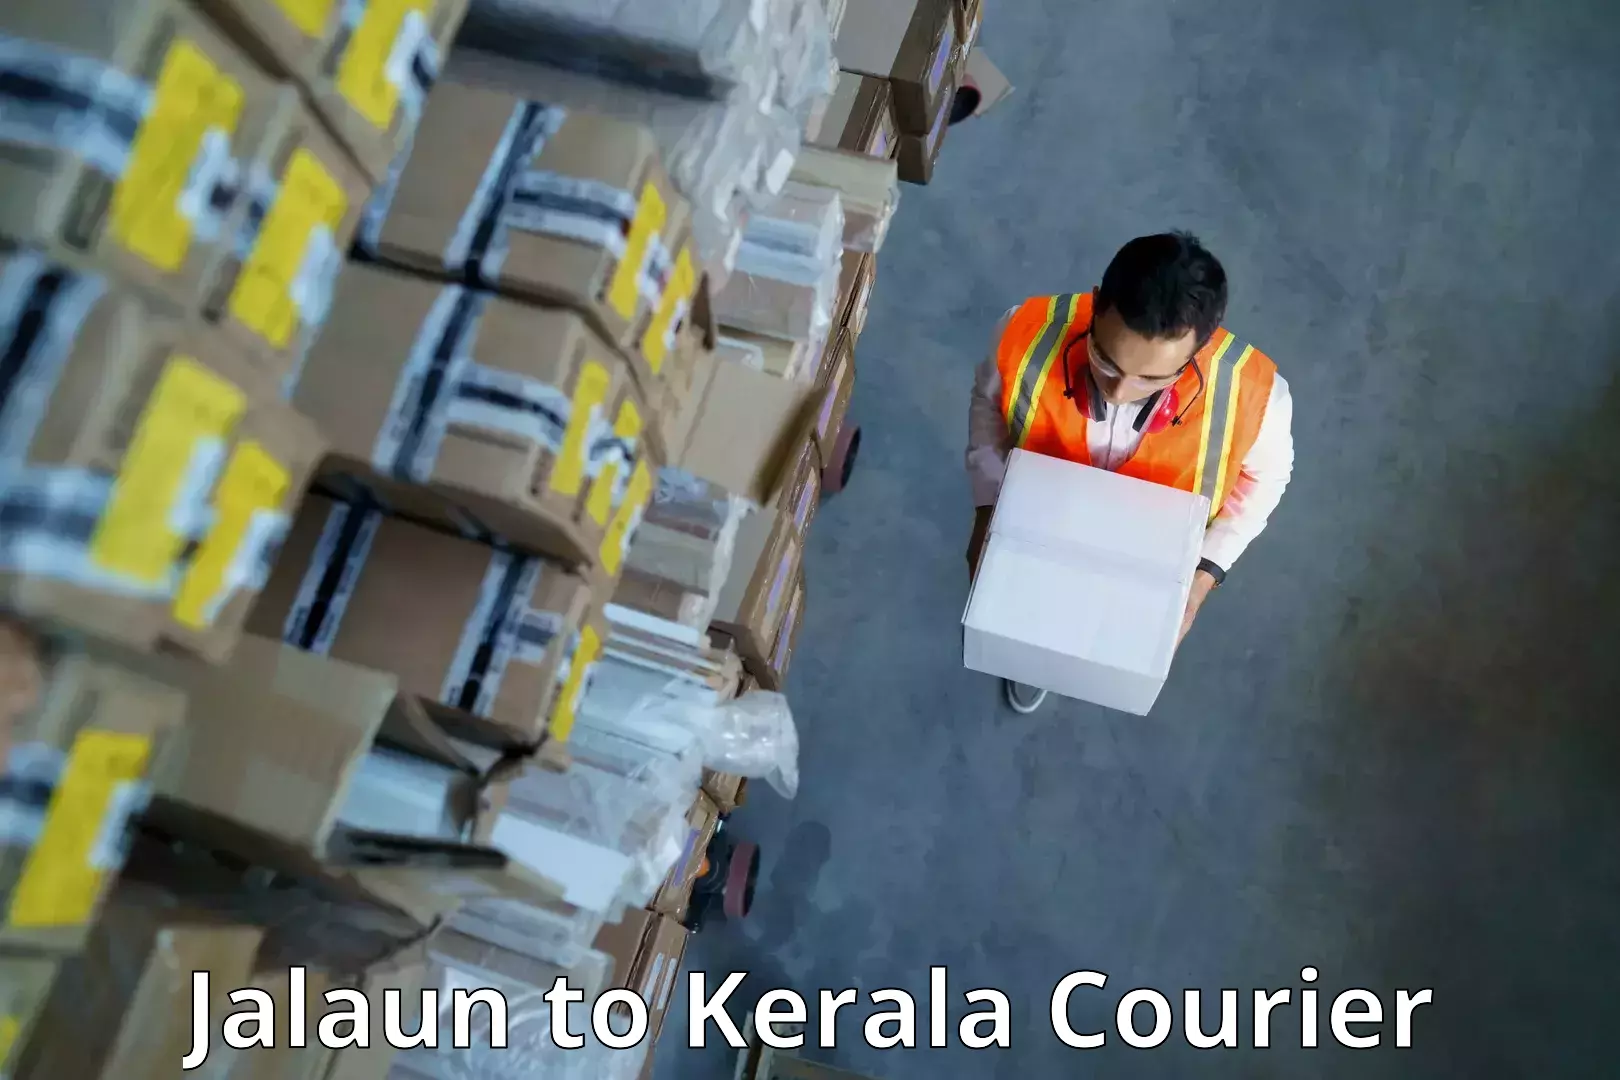 Reliable delivery network Jalaun to Idukki